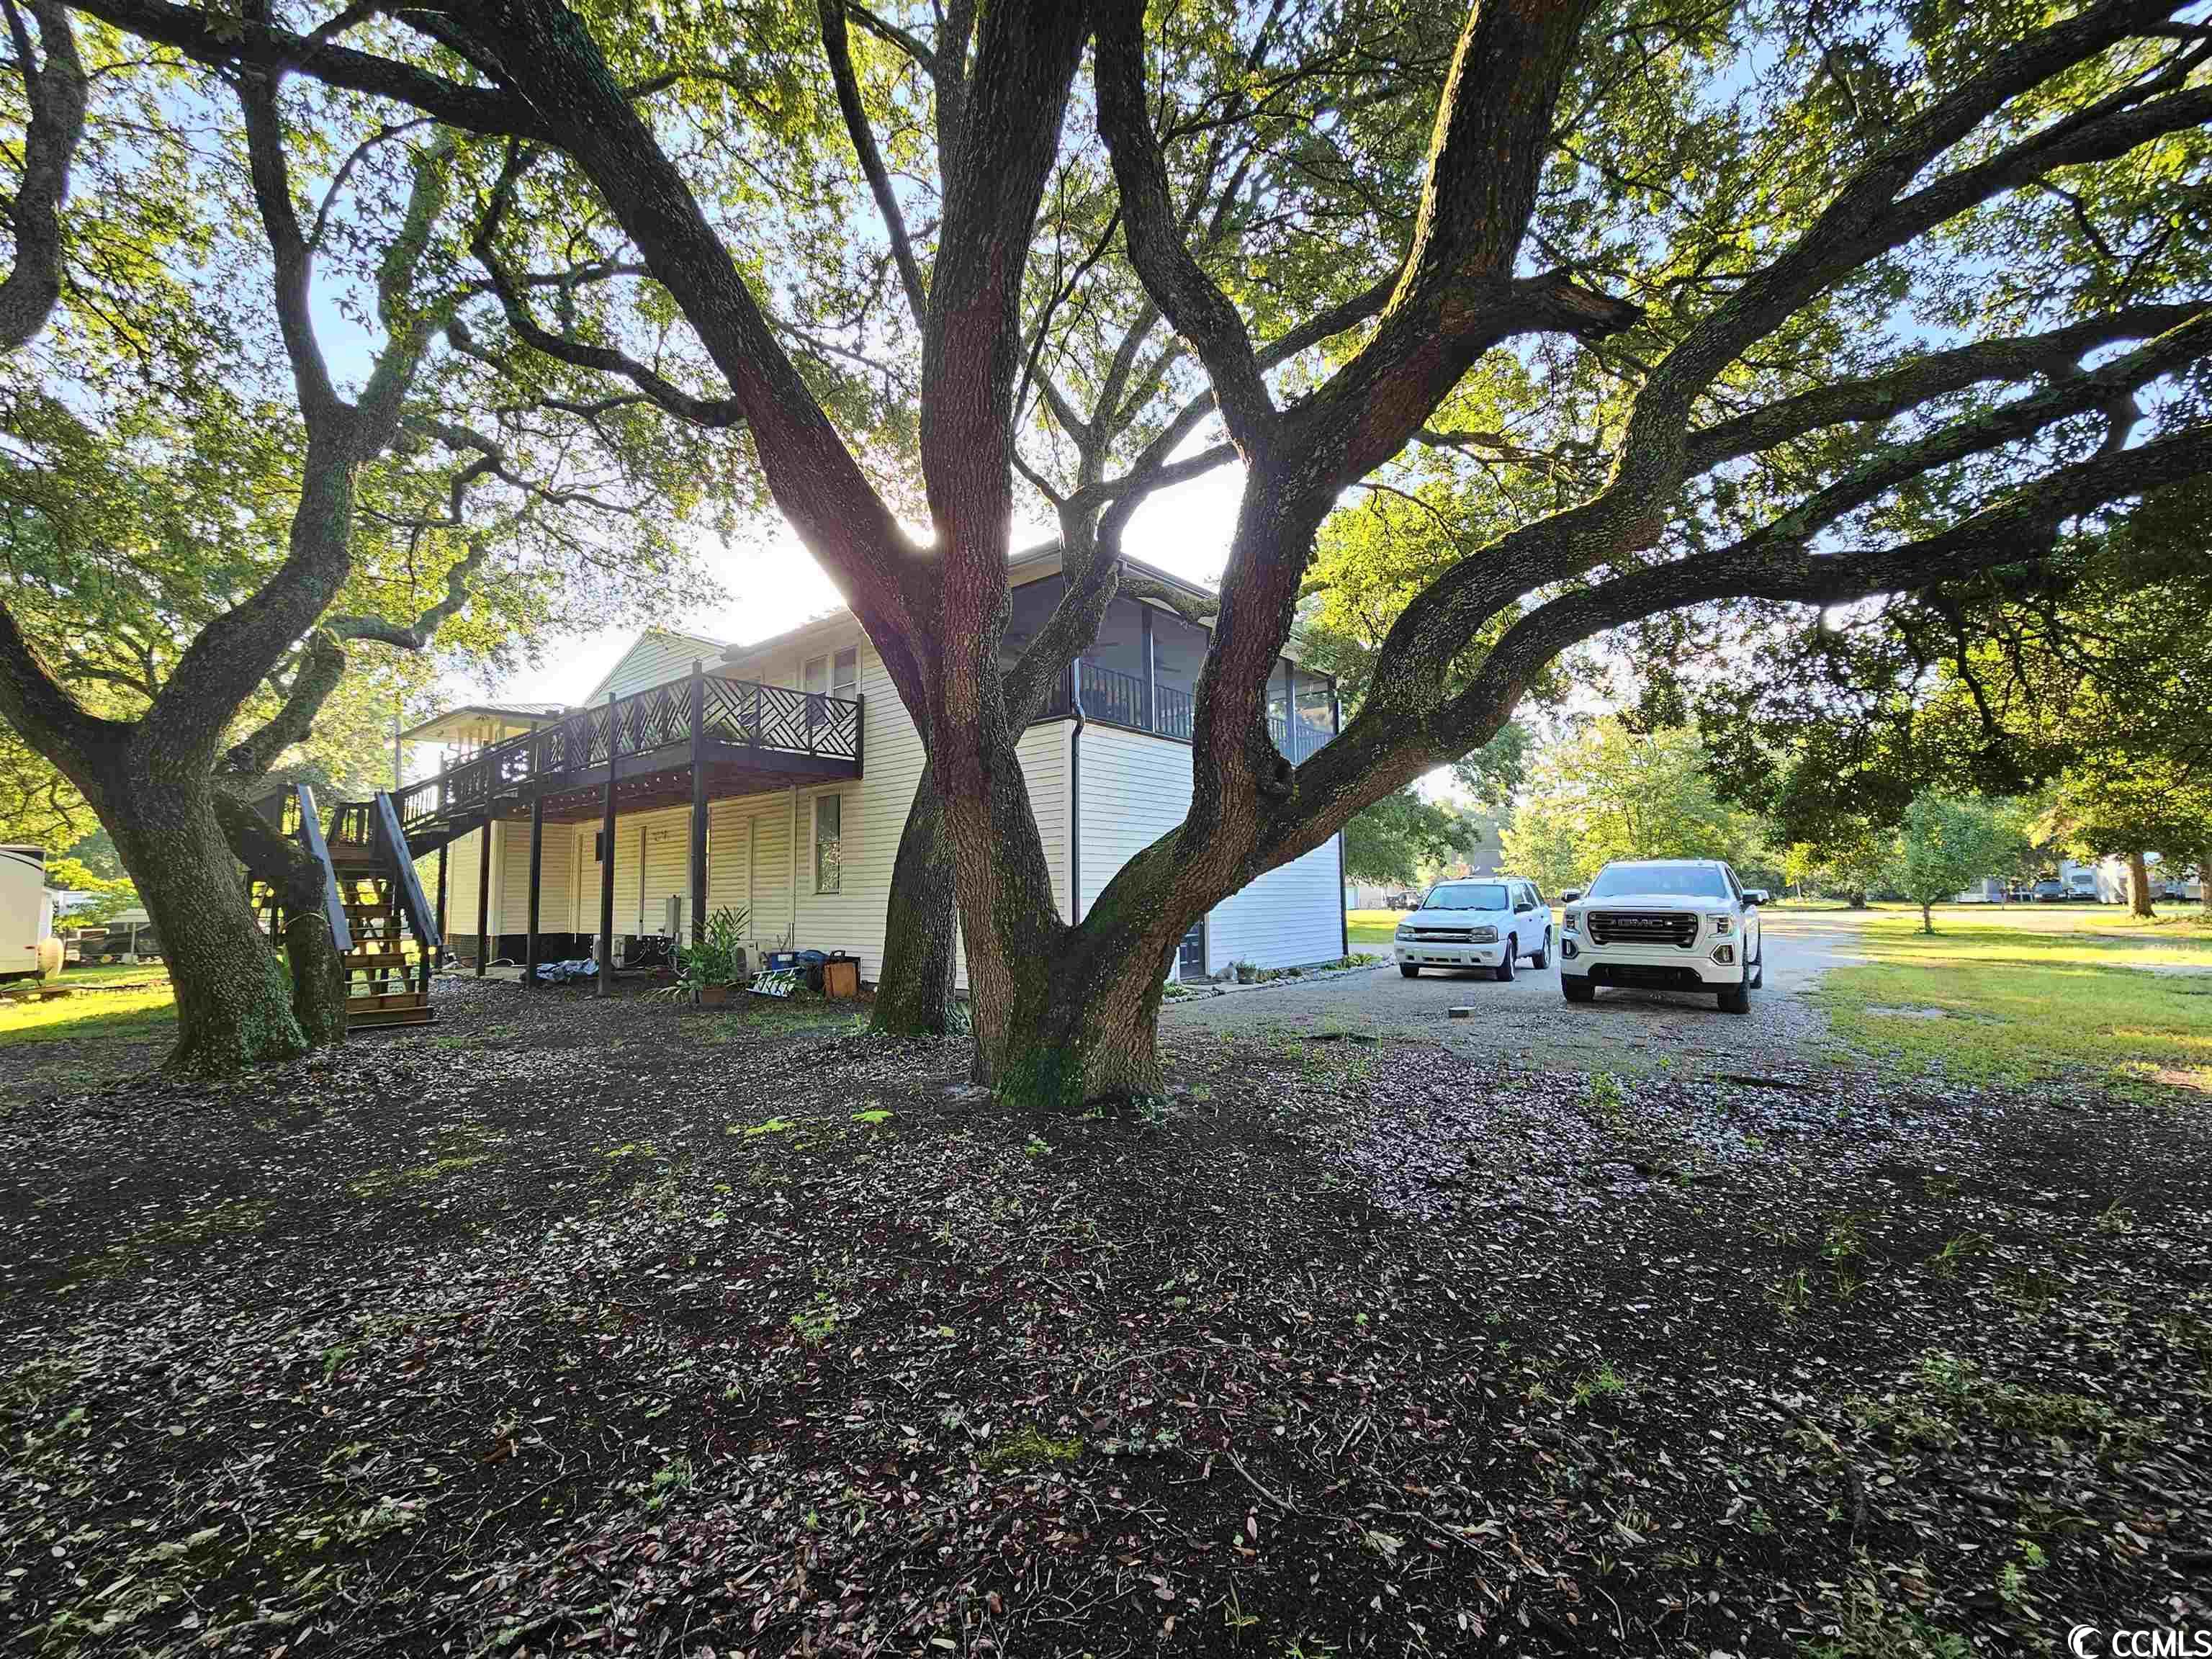 the best of yesterday and today is featured with this home at 4426 old kings hwy. centrally located between the waccamaw river and the inlet, this home has a little bit of it all sitting on just over an acre of land. the original part of the home on the second level is beautiful old beach house built in 1958. construction of the home was knotty pine framing including all of the finish work. pine walls, ceilings, floors, doors, cabinets, and trim. the screened porch on the top floor has a breeze just about any time of day. the home had an unmatched engineering cradle system when it was relocated to the current site. the bottom floor was renovated in 2020 has is its own separate living quarters with a private entrance. at the same all new siding, metal roof, ac units, and, and back porch was completed, as well. the home is currently used as a two-family second home. both the 1st and 2nd level are very sunny, open floor plans. downstairs is 2 bedrooms, 1.5 bathrooms, and, upstairs is 2 bedrooms, 1 bathroom. the home sits on a double lot and has a very expansive driveway and backyard. the driveway is a full circle from each property line with parking capacity for anything you have. there is no hoa and plenty of room for boats, rvs, trailers, and much more in the backyard alone. there is plenty of shade under all the majestic oaks that line throughout the property. the downstairs of the home features a commercial kitchen with workshop, and full bathroom along with a 50 amp service on the exterior. it is less than a mile golf cart ride to either the marshwalk or wacca wache marina and a two mile bike ride to huntington beach state park. there are no rental restrictions on the property.